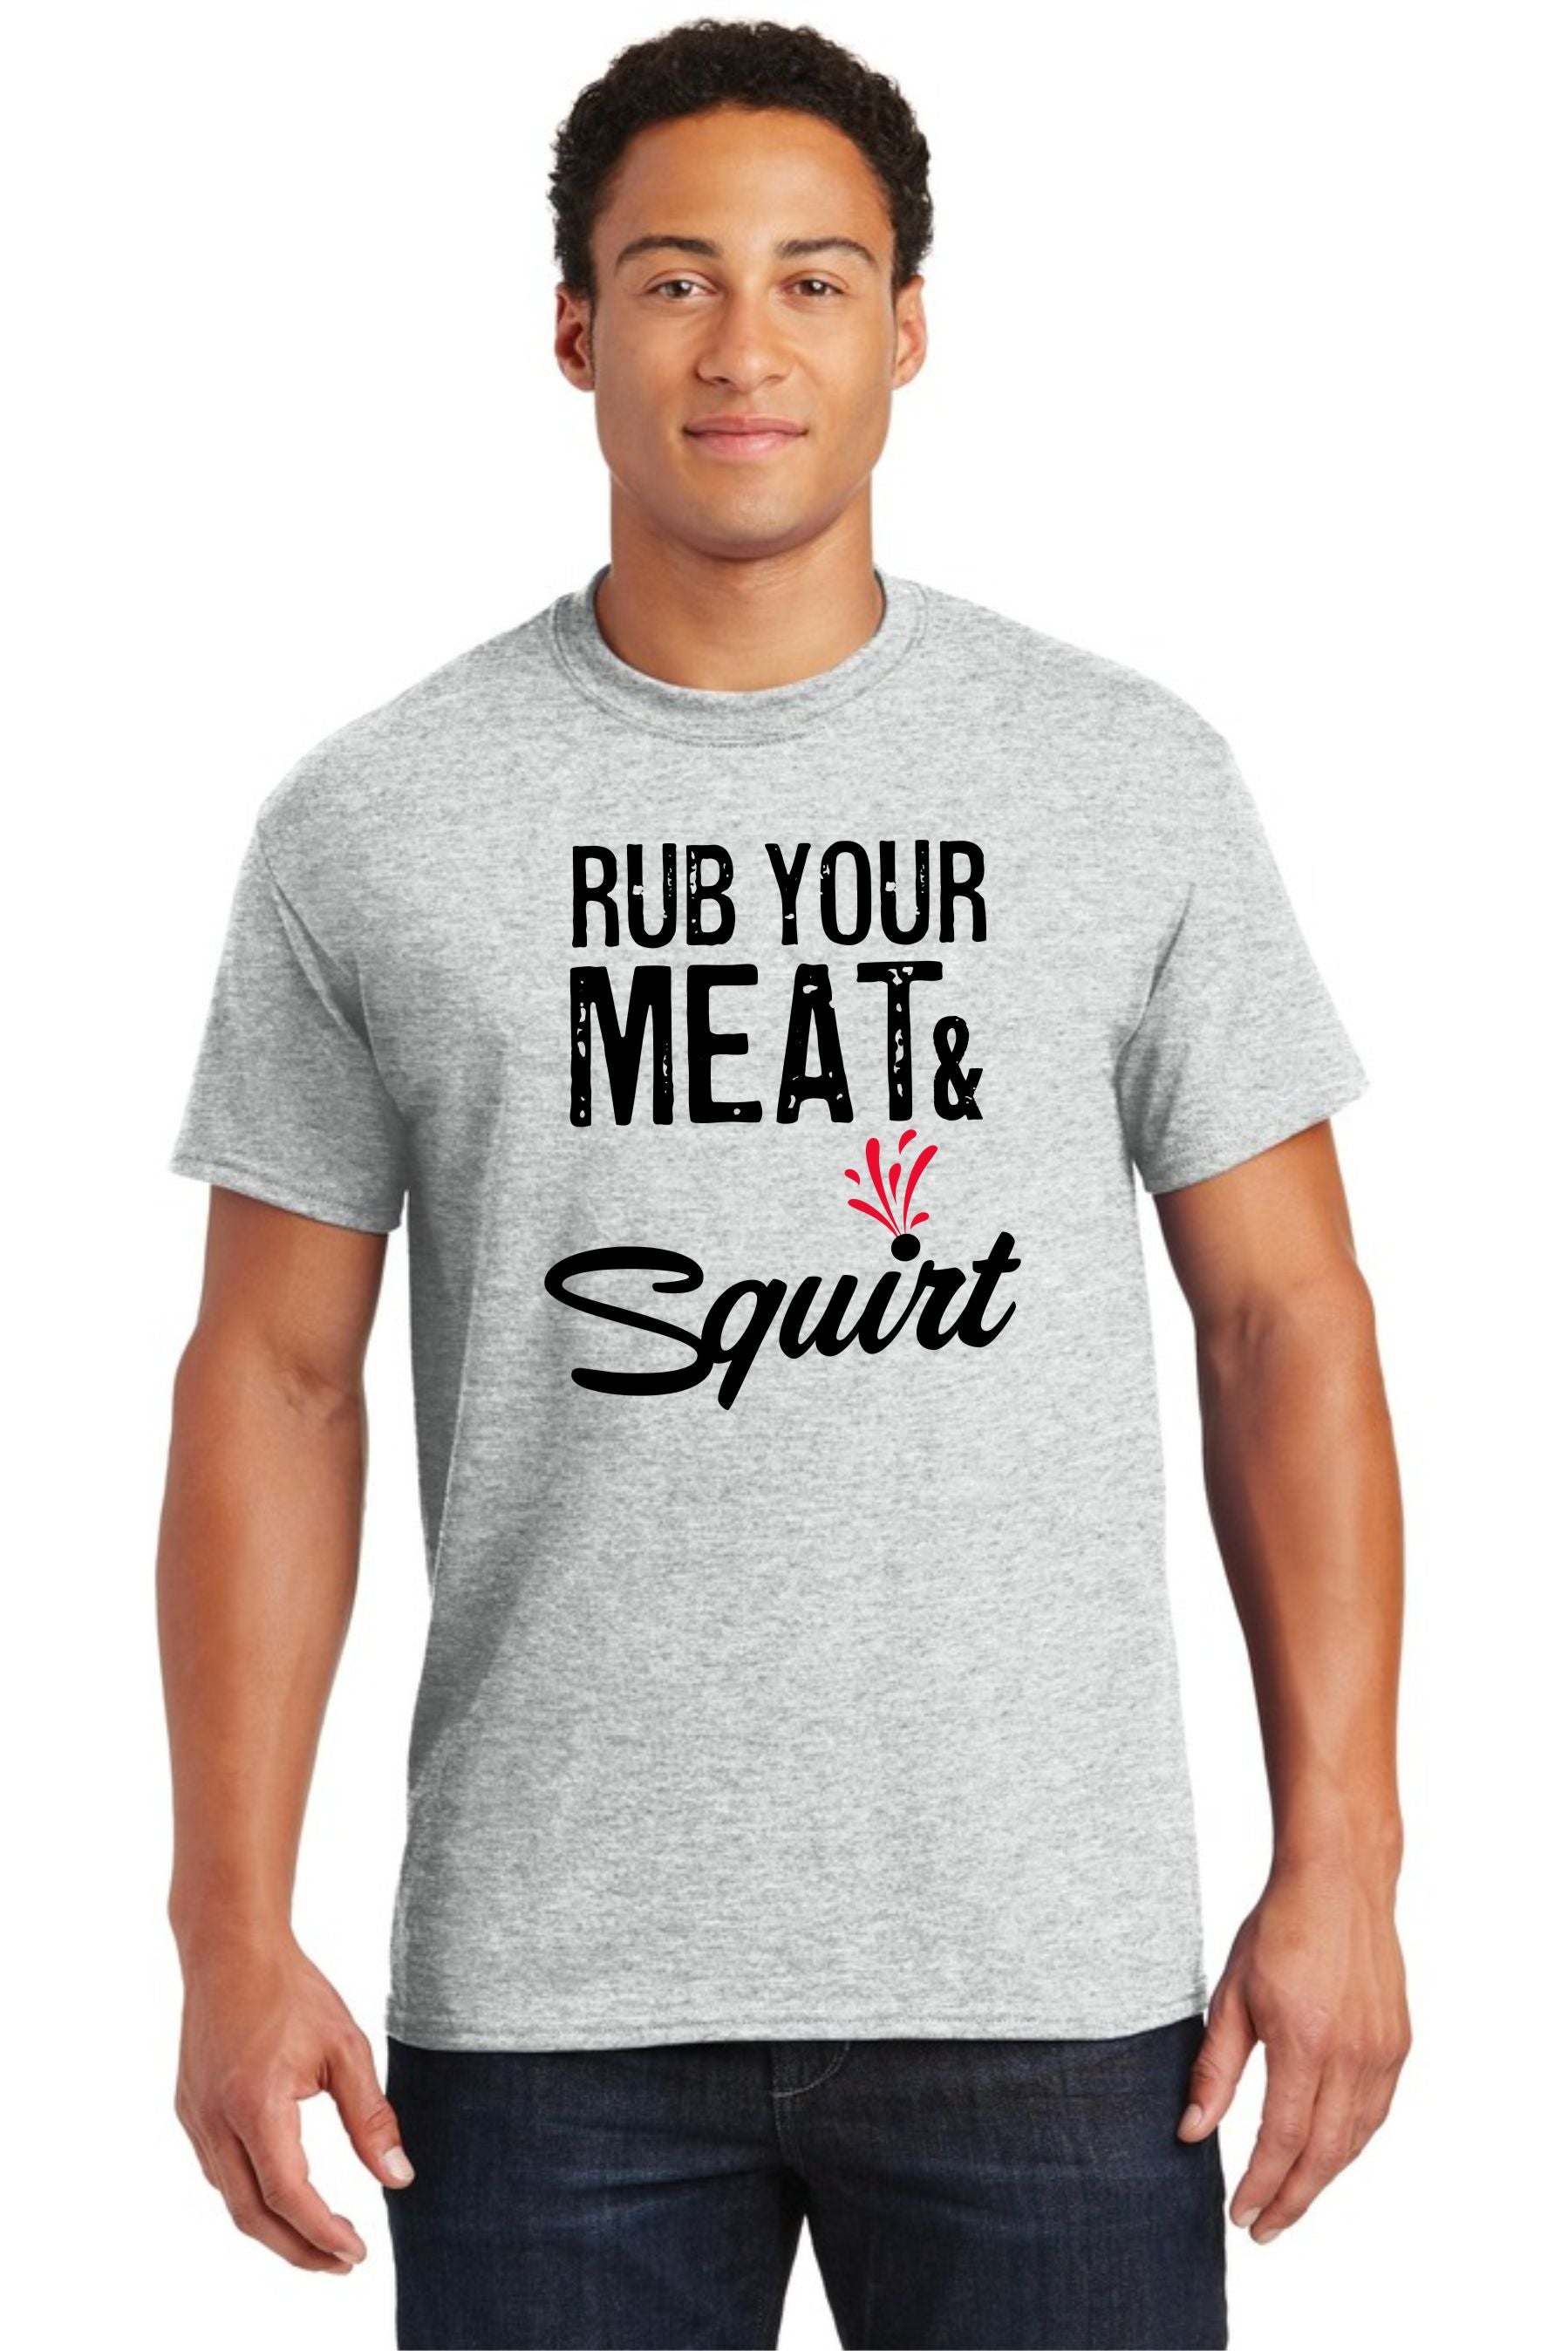 Rub Your Meat And Squirt